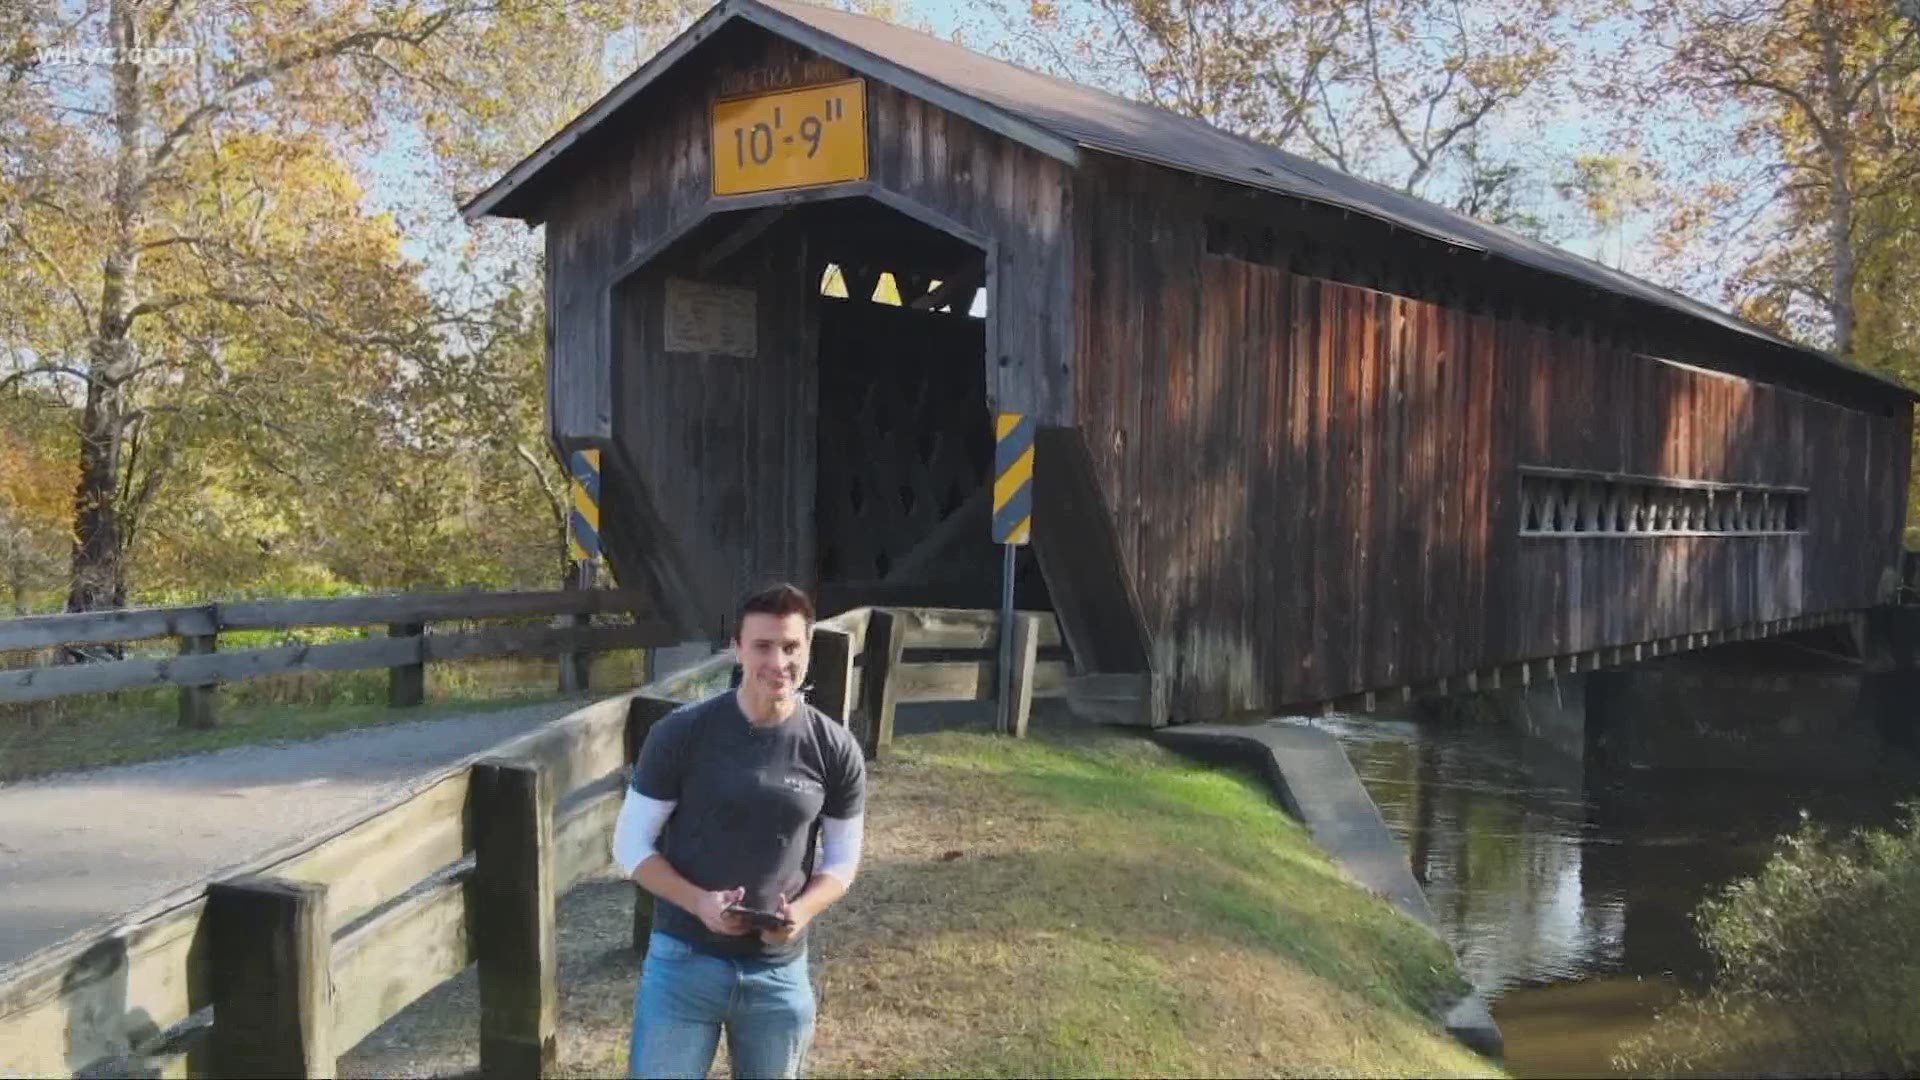 Oct. 23, 2020: 3News meteorologist Matt Standridge launches his new 'GO-HIO' series by exploring the covered bridges and fall colors in Ashtabula County.